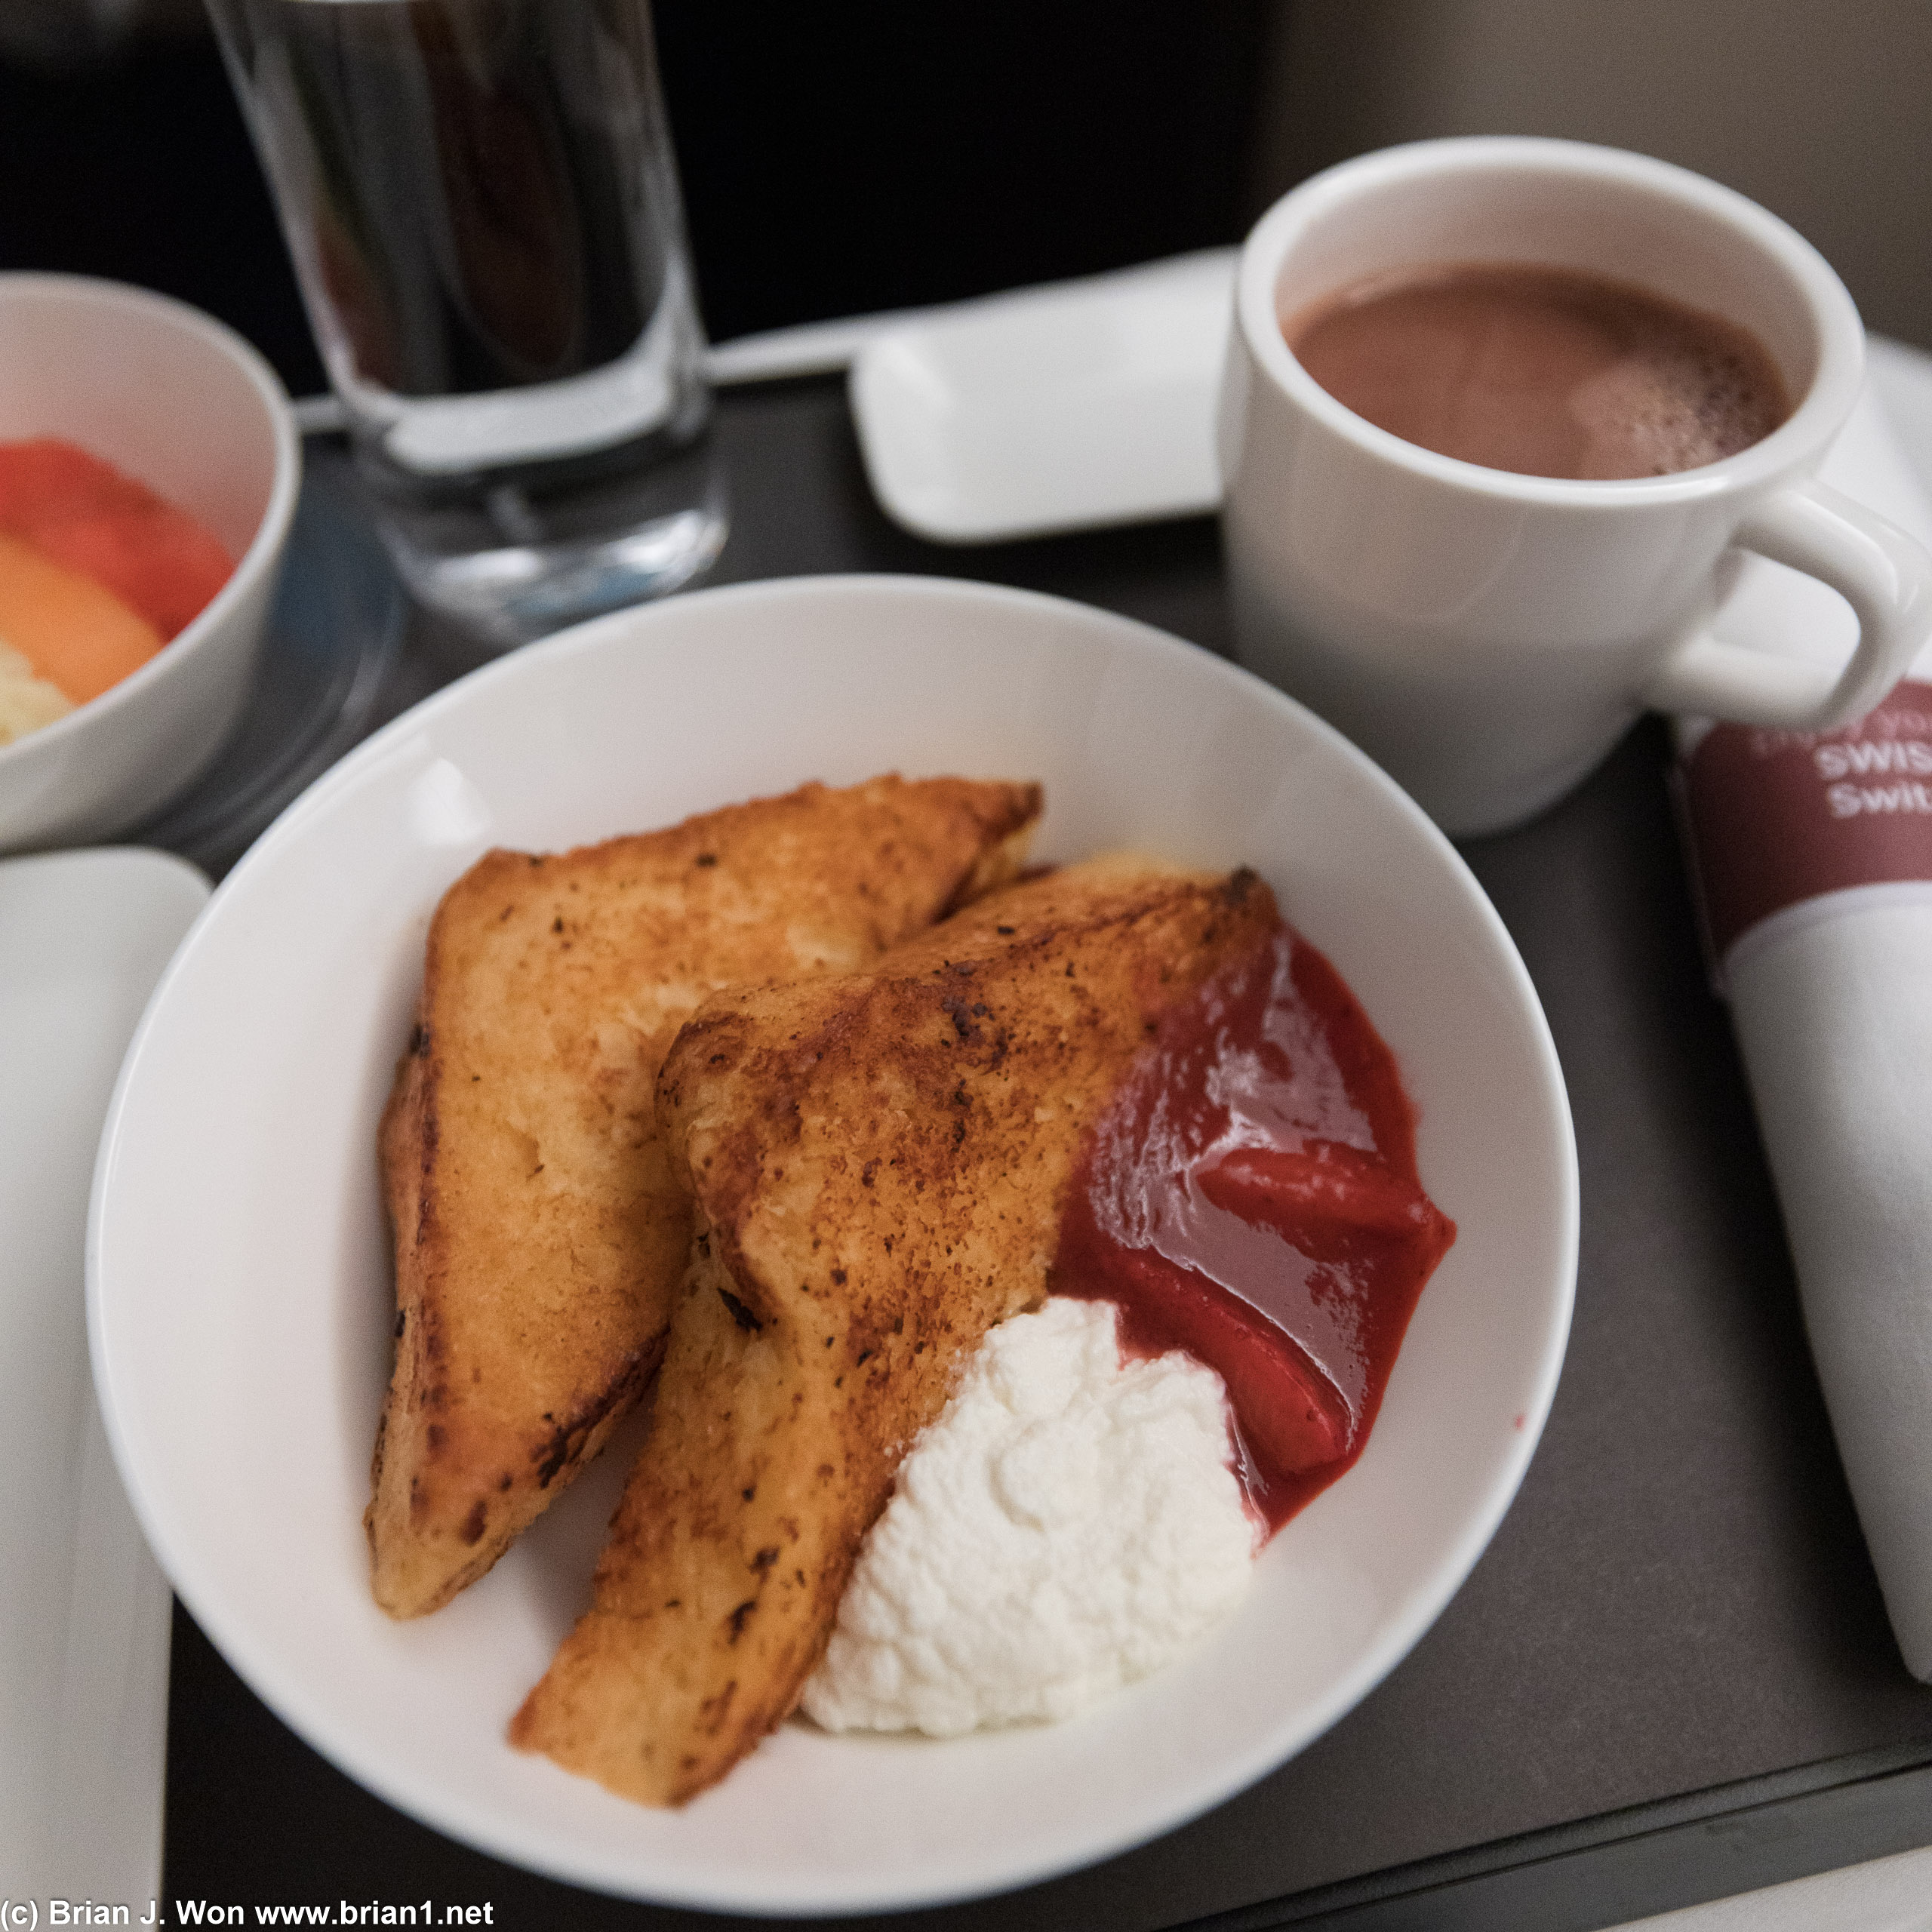 Pretty french toast for breakfast on SWISS Air. Taste sadly did not match its looks. But the hot chocolate was good.